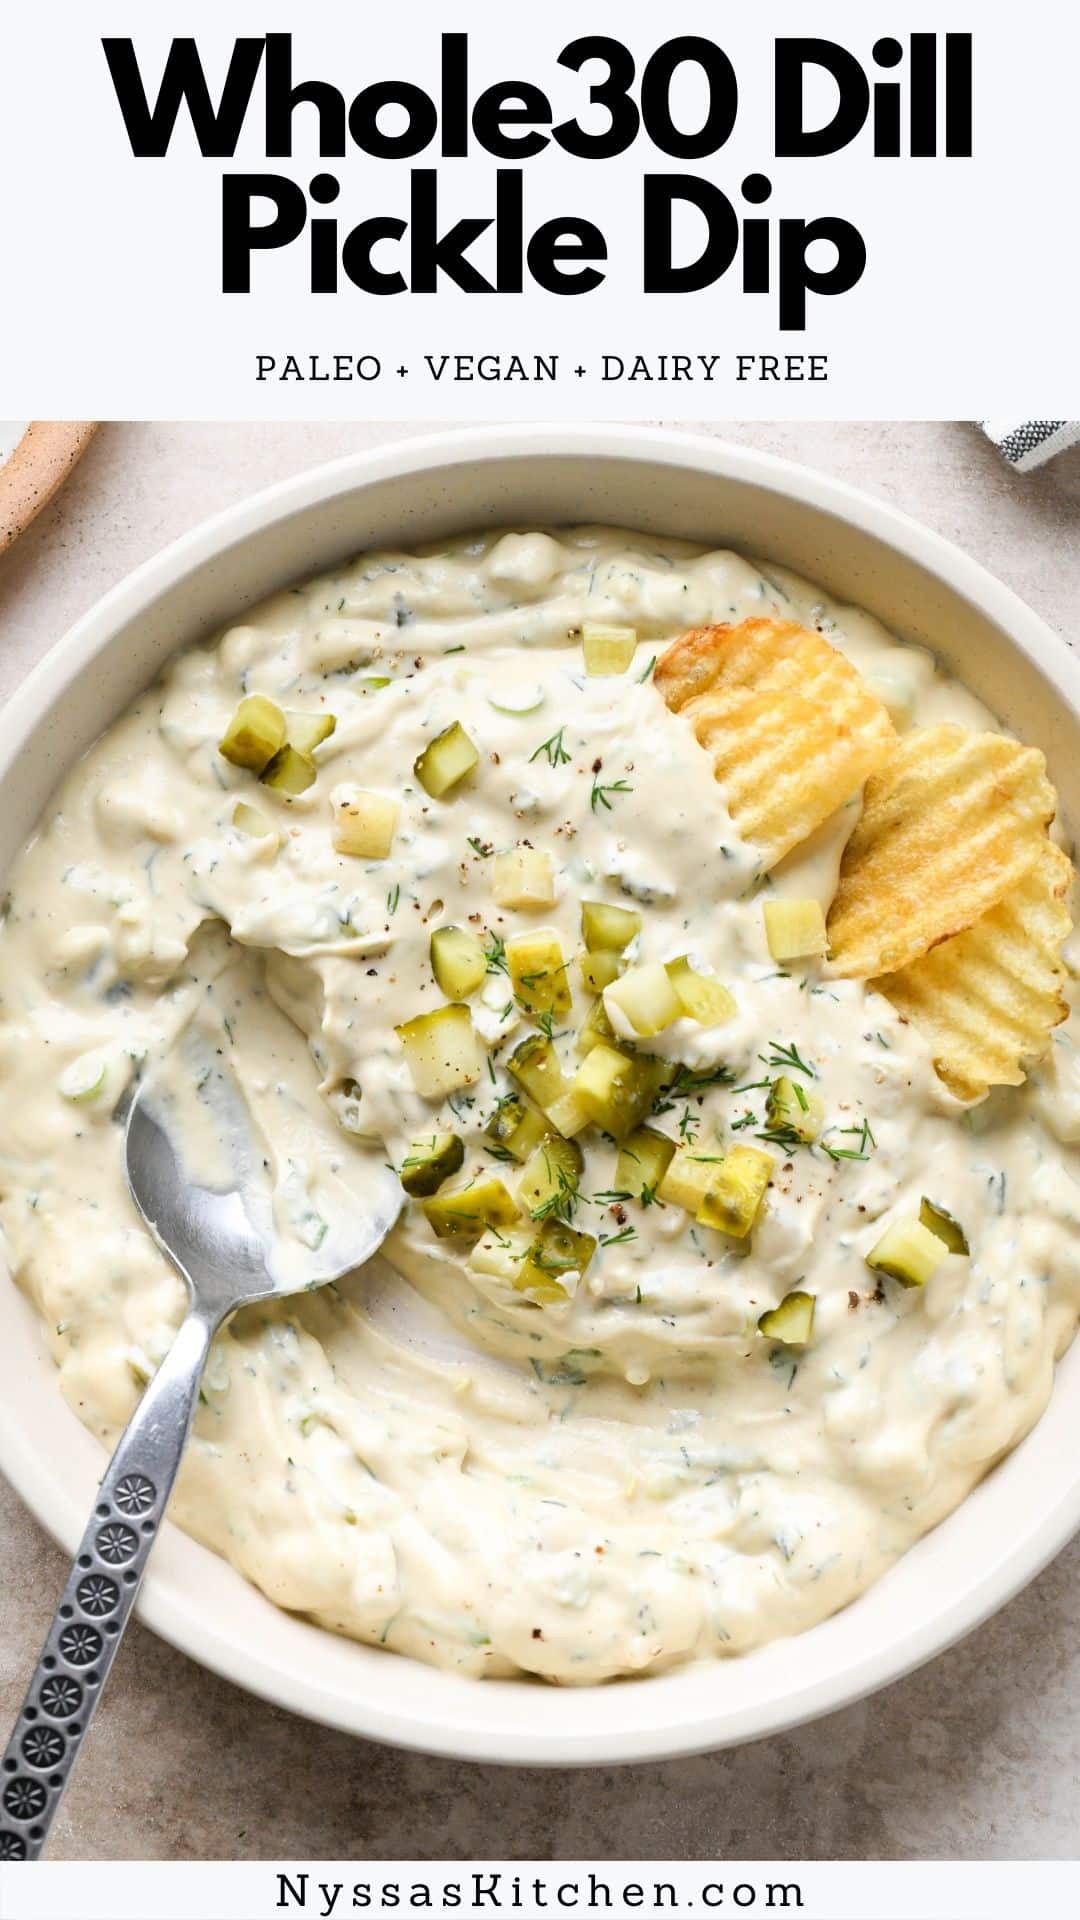 This dairy free dill pickle dip is a delicious version of every pickle lovers dream dip! No sour cream, cream cheese, or dairy needed for a super creamy texture. Perfect for snacking, potlucks, and summer bbq's. Made with raw cashews, coconut aminos, nutritional yeast, dried spices, fresh dill, and plenty of pickles! Dairy free, vegan, paleo, and Whole30 compatible.